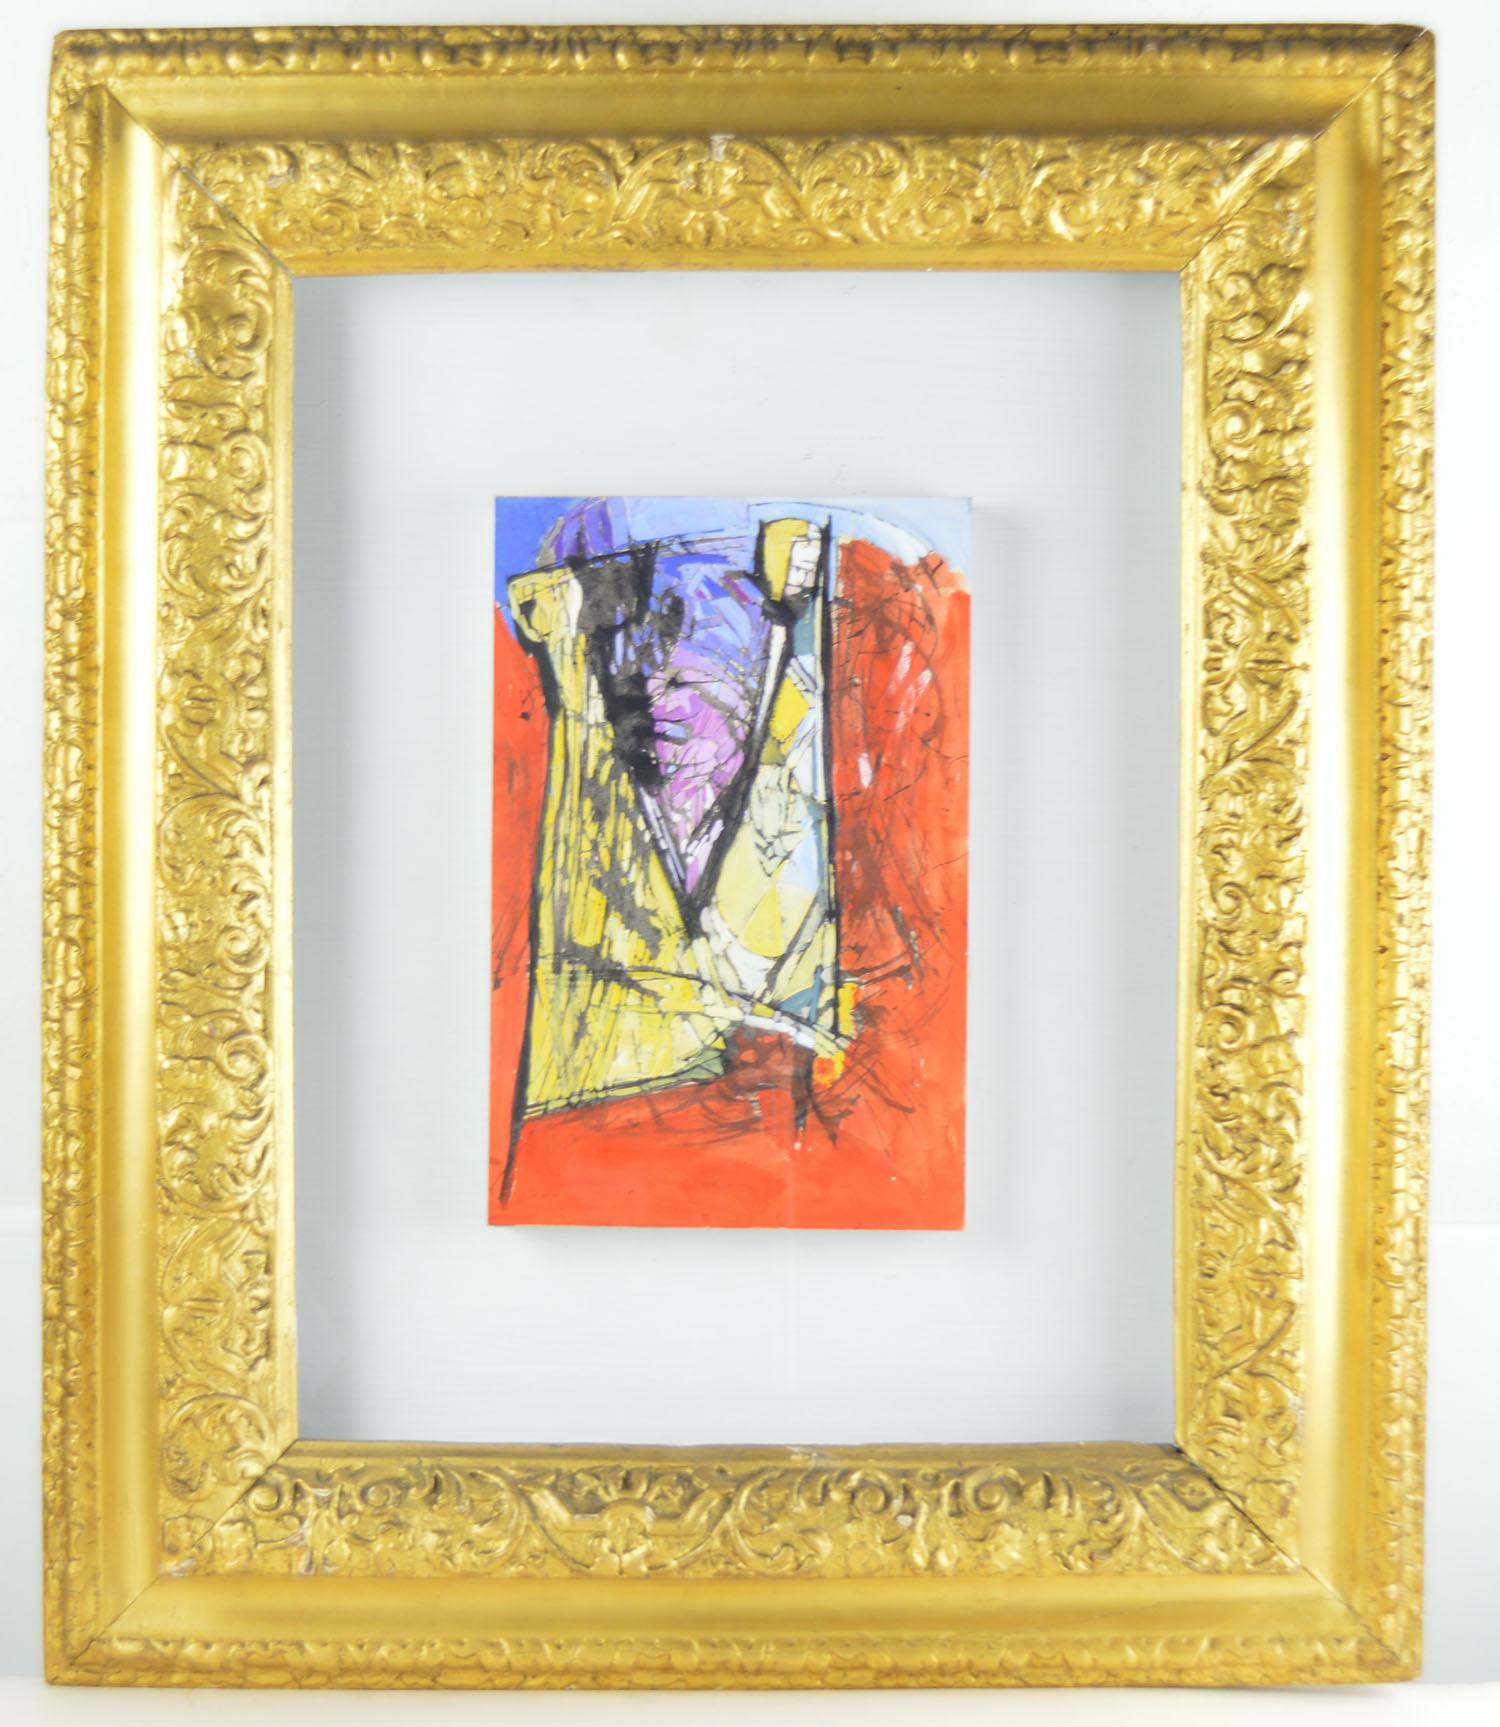 Wonderful figural abstract painting.

Artist unknown.

In the style of the very fashionable artist Lynn Chadwick

Lovely bright colors.

Gouache on card.

Presented in an 18th century giltwood frame.

The measurement given below is the